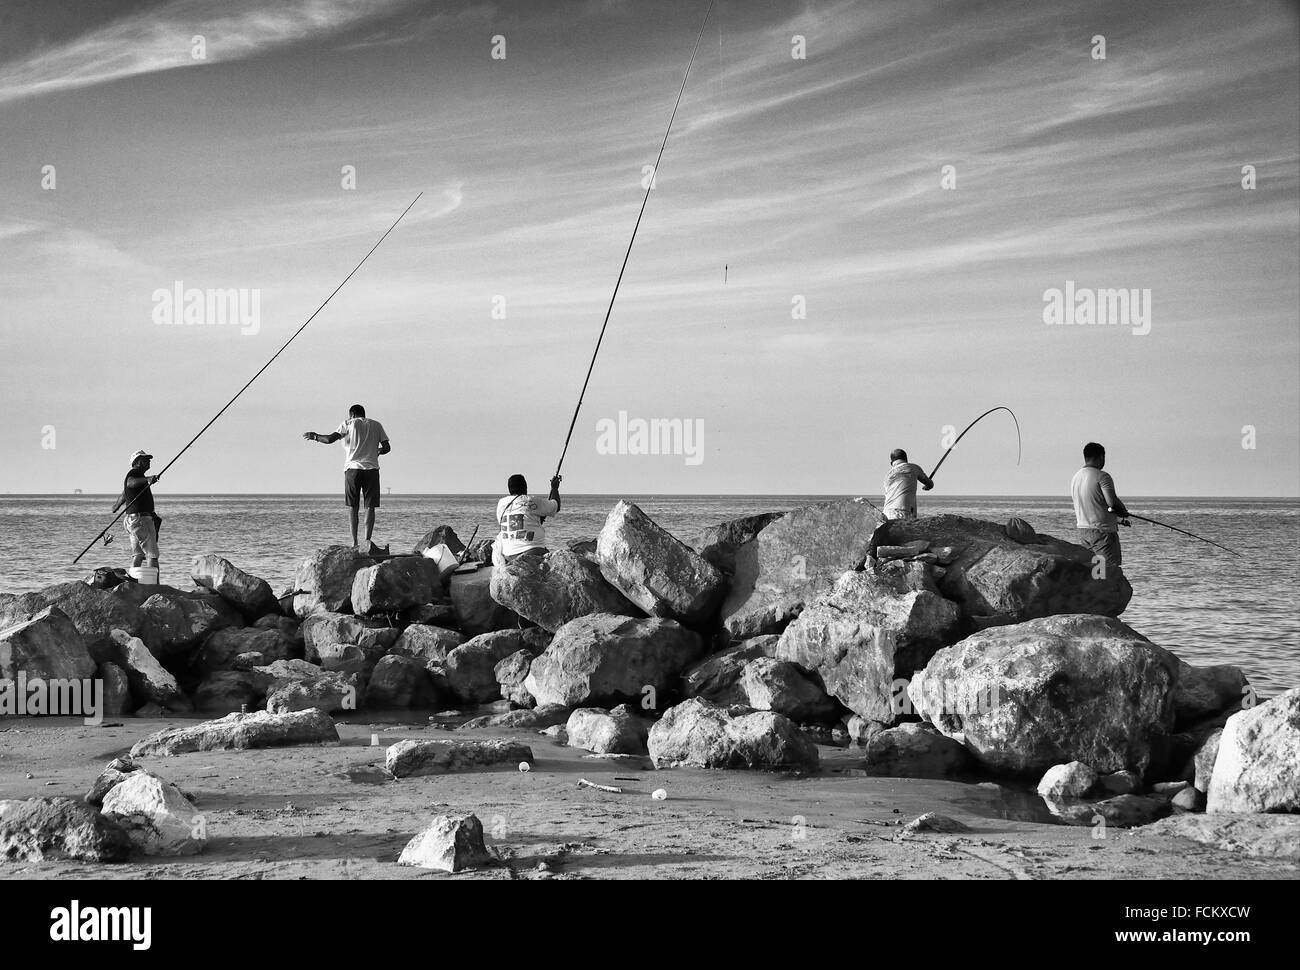 group of men fishing in traditional way - with fishing rods